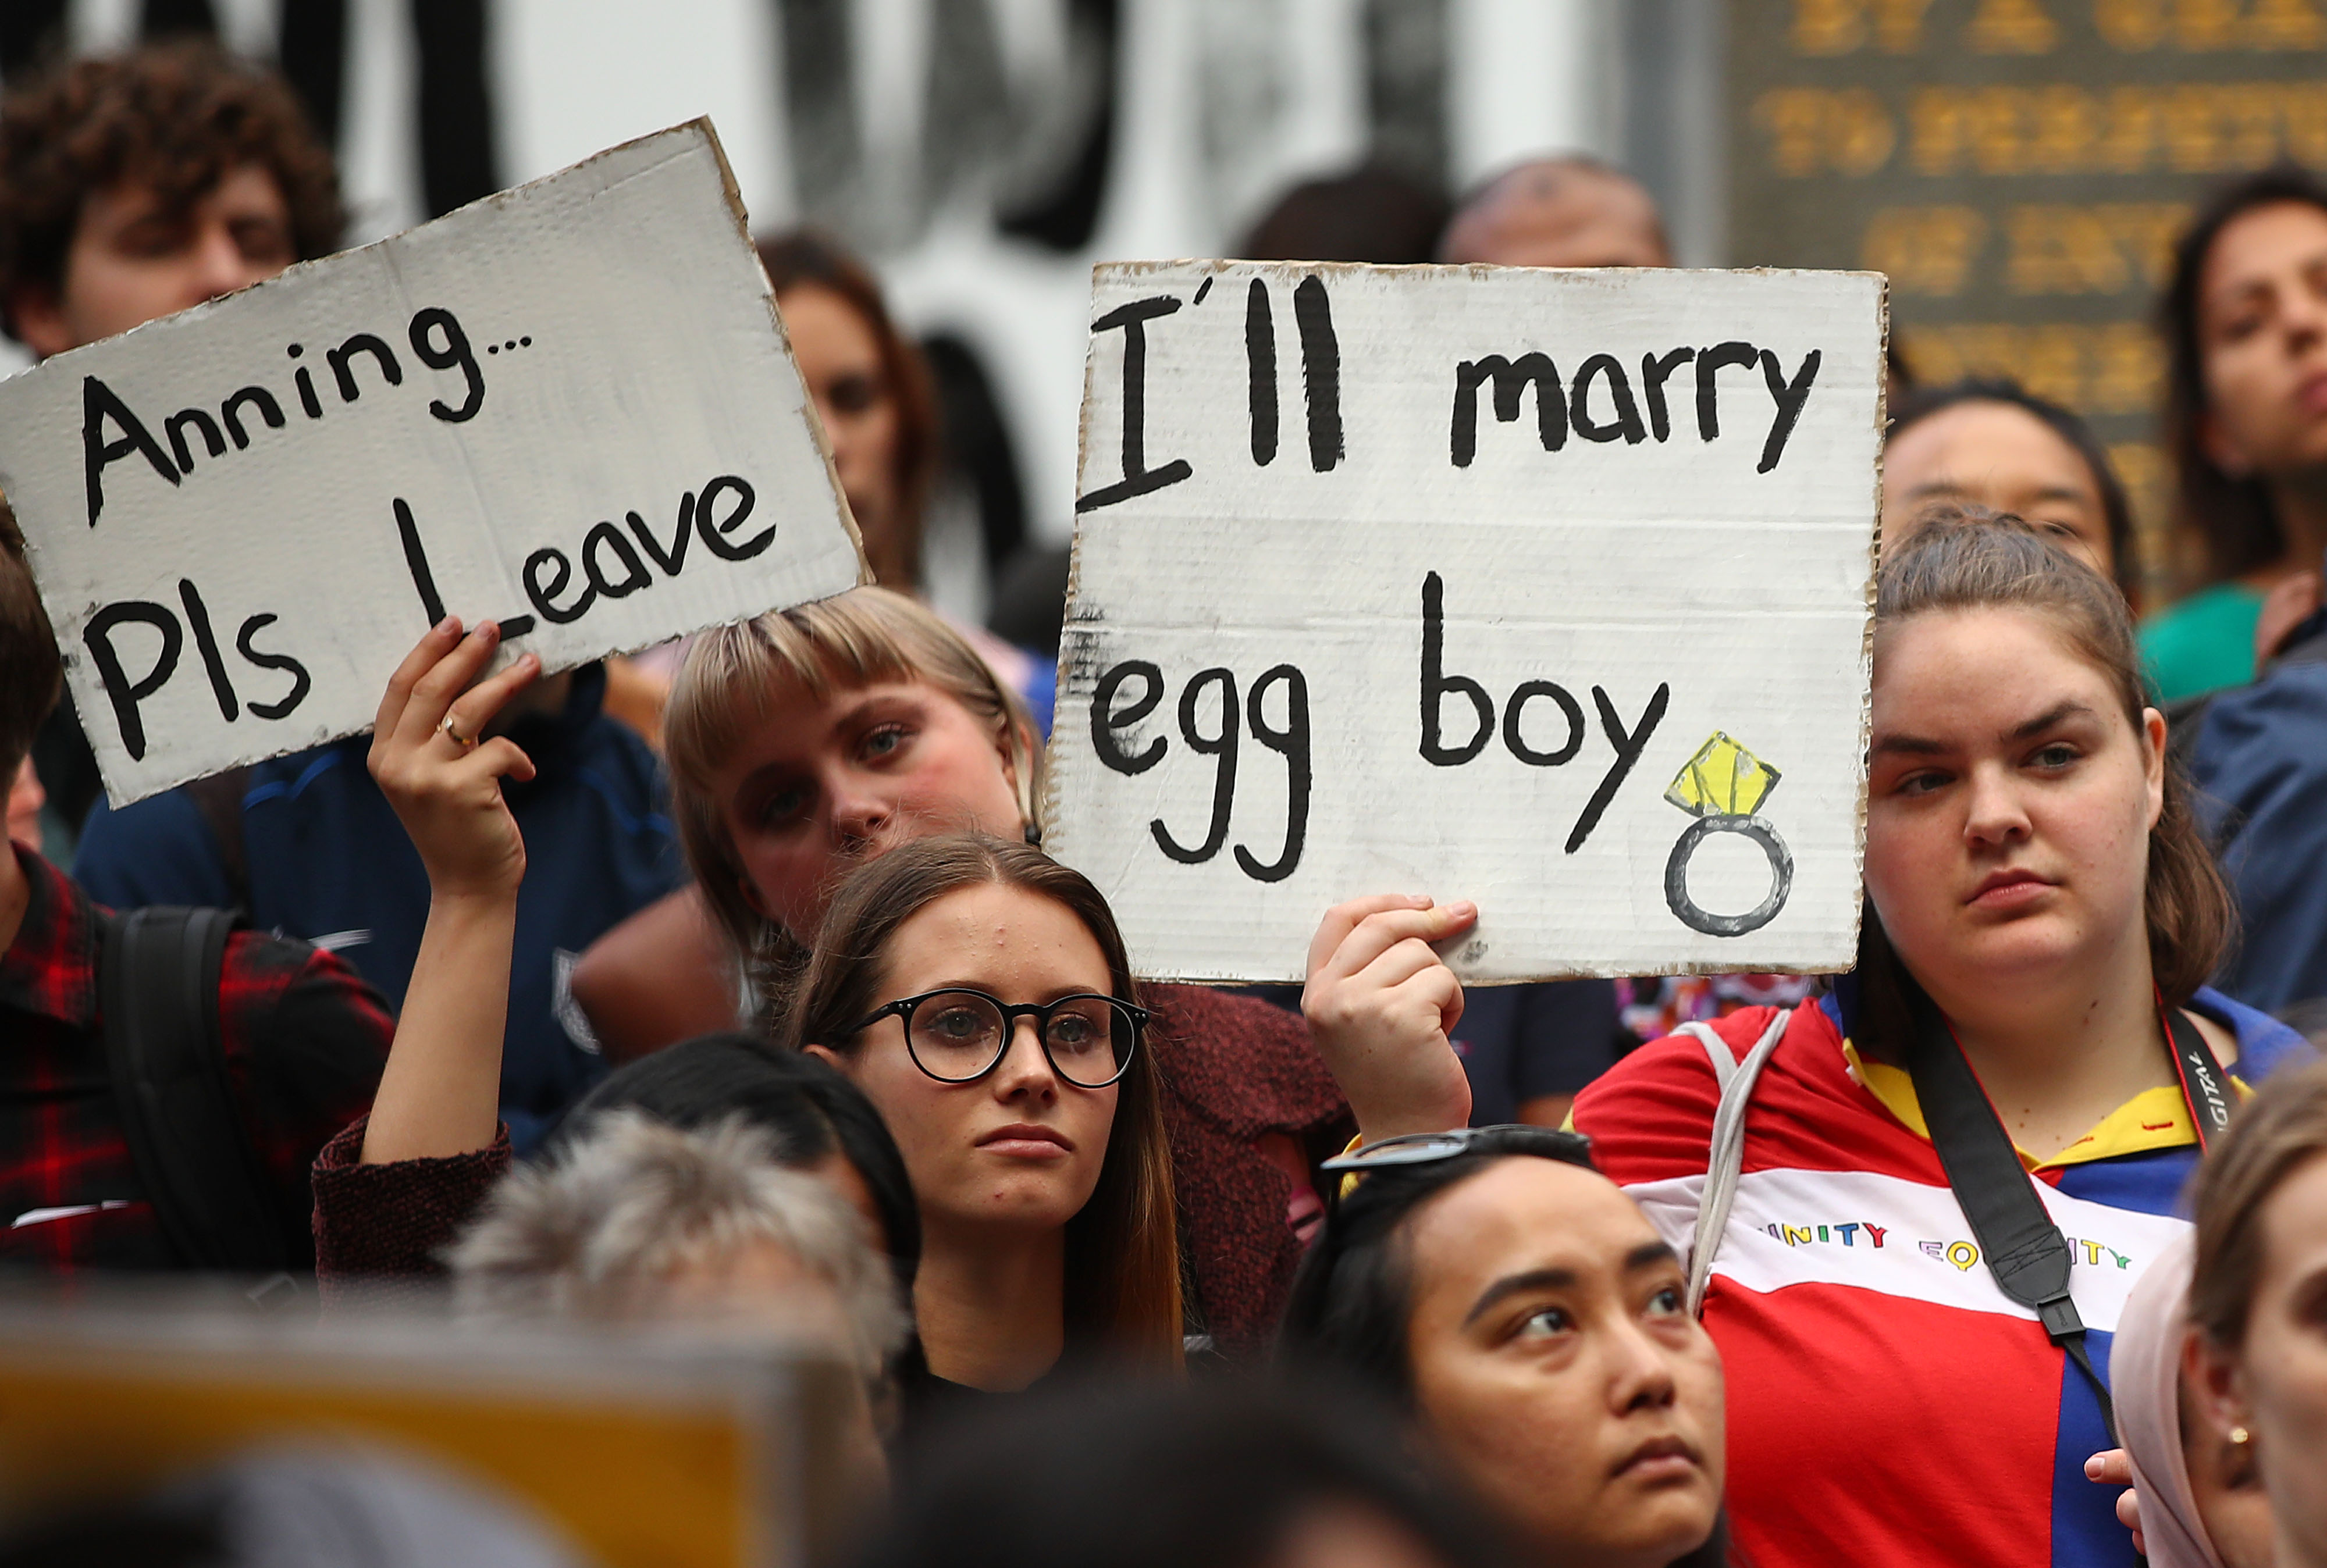 MELBOURNE, AUSTRALIA - MARCH 19: Protesters hold placards aloft as they march during the Stand Against Racism and Islamophobia: Fraser Anning Resign! rally on March 19, 2019 in Melbourne, Australia. (Scott Barbour/Getty Images)